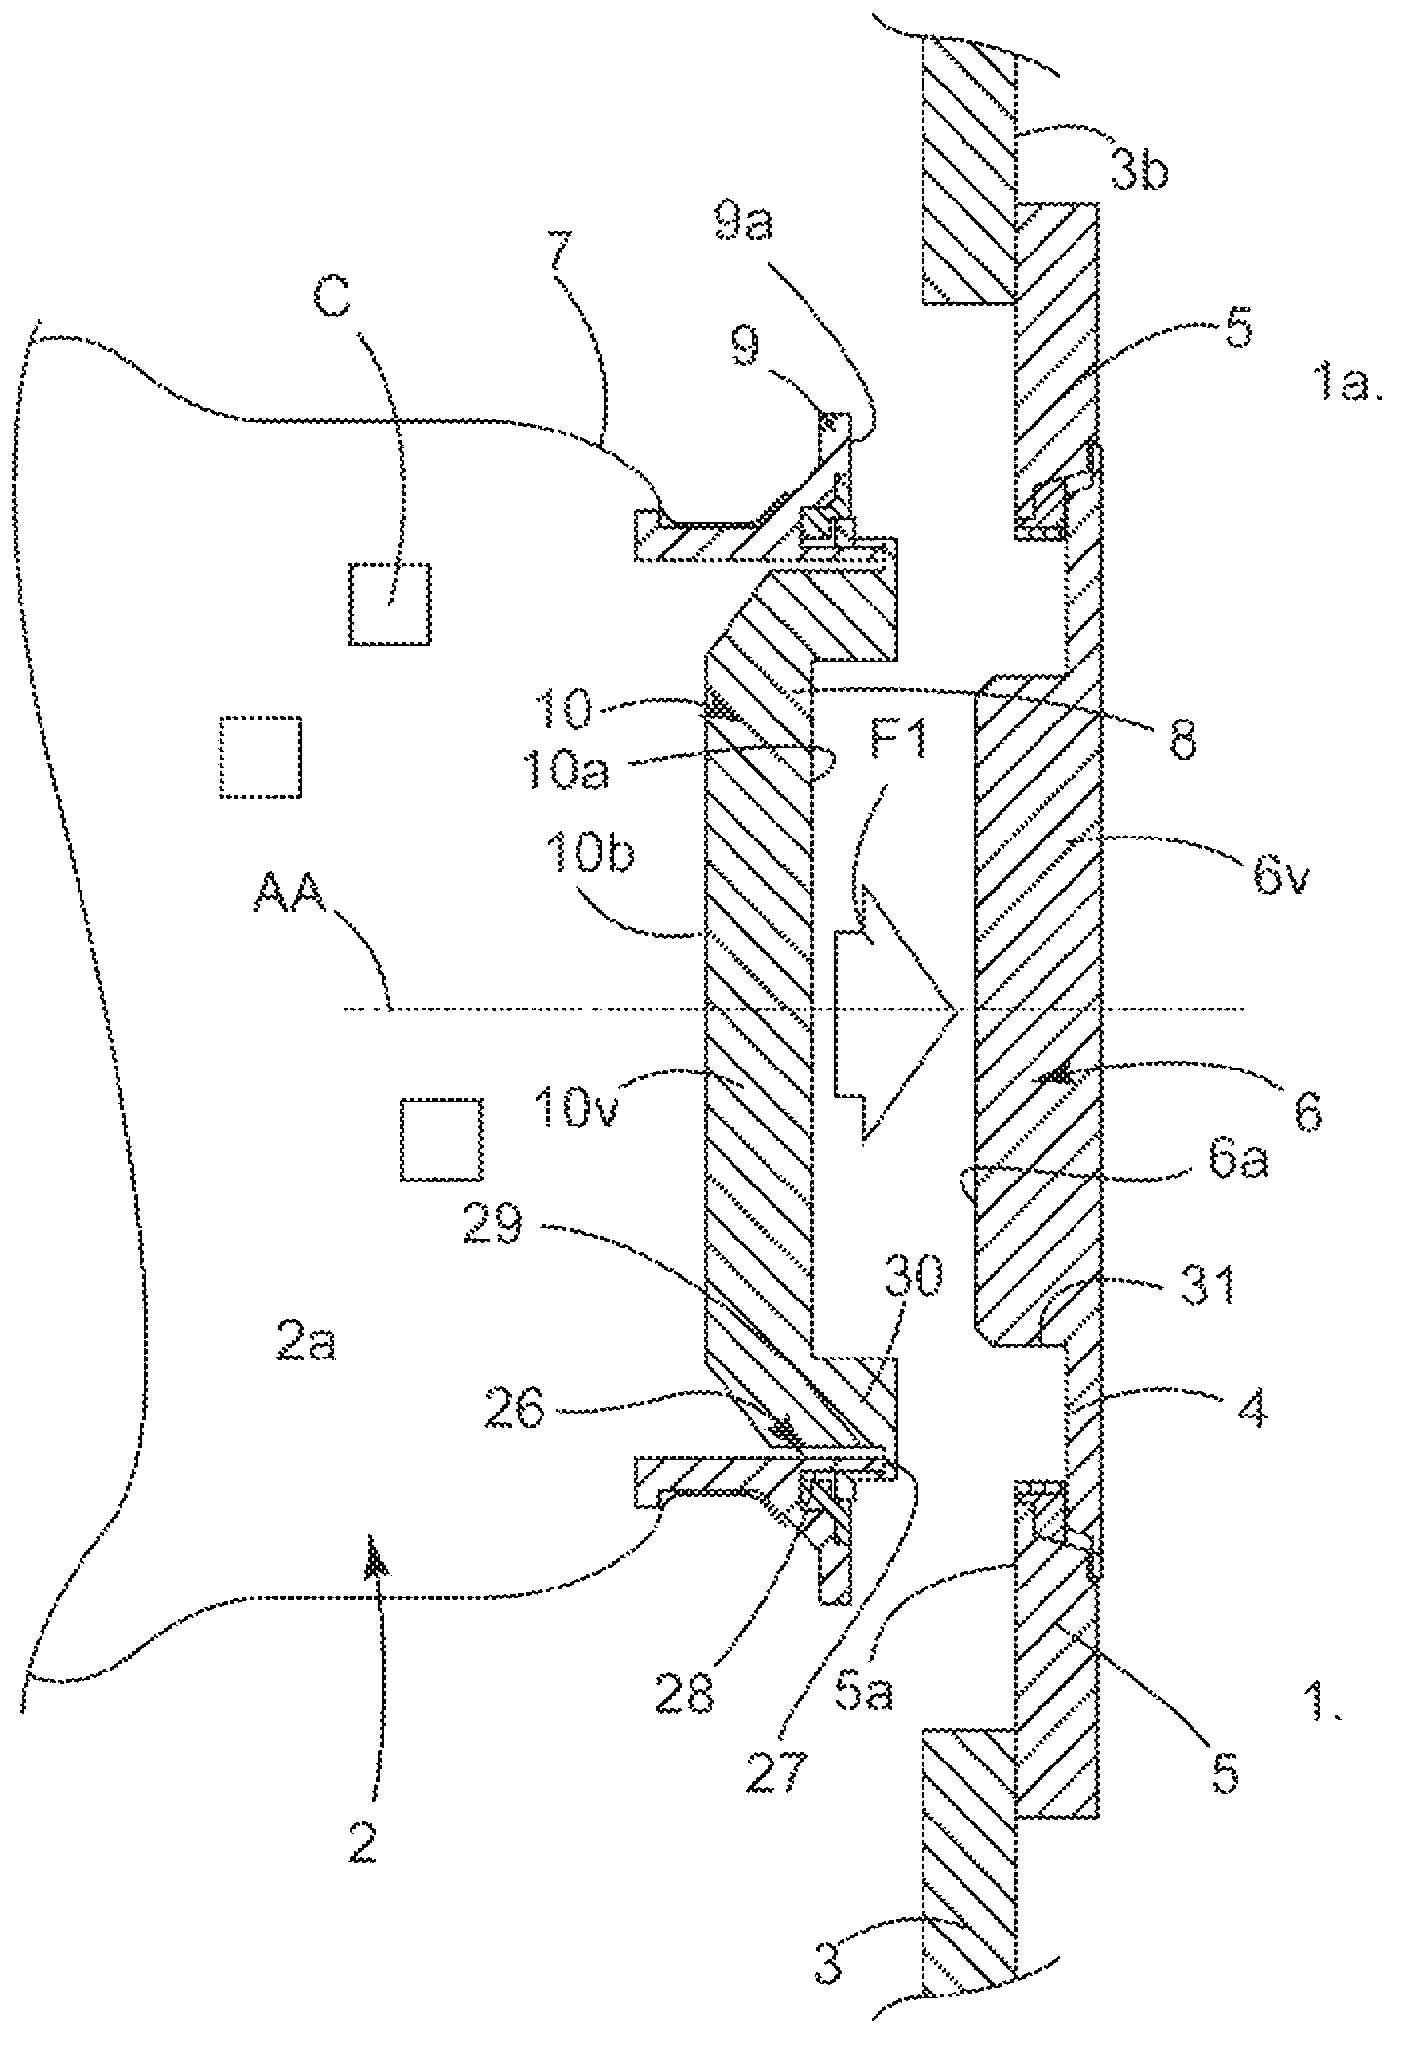 Improvements to the tight connection and tight transfer between two housings in view of an aseptic transfer therebetween